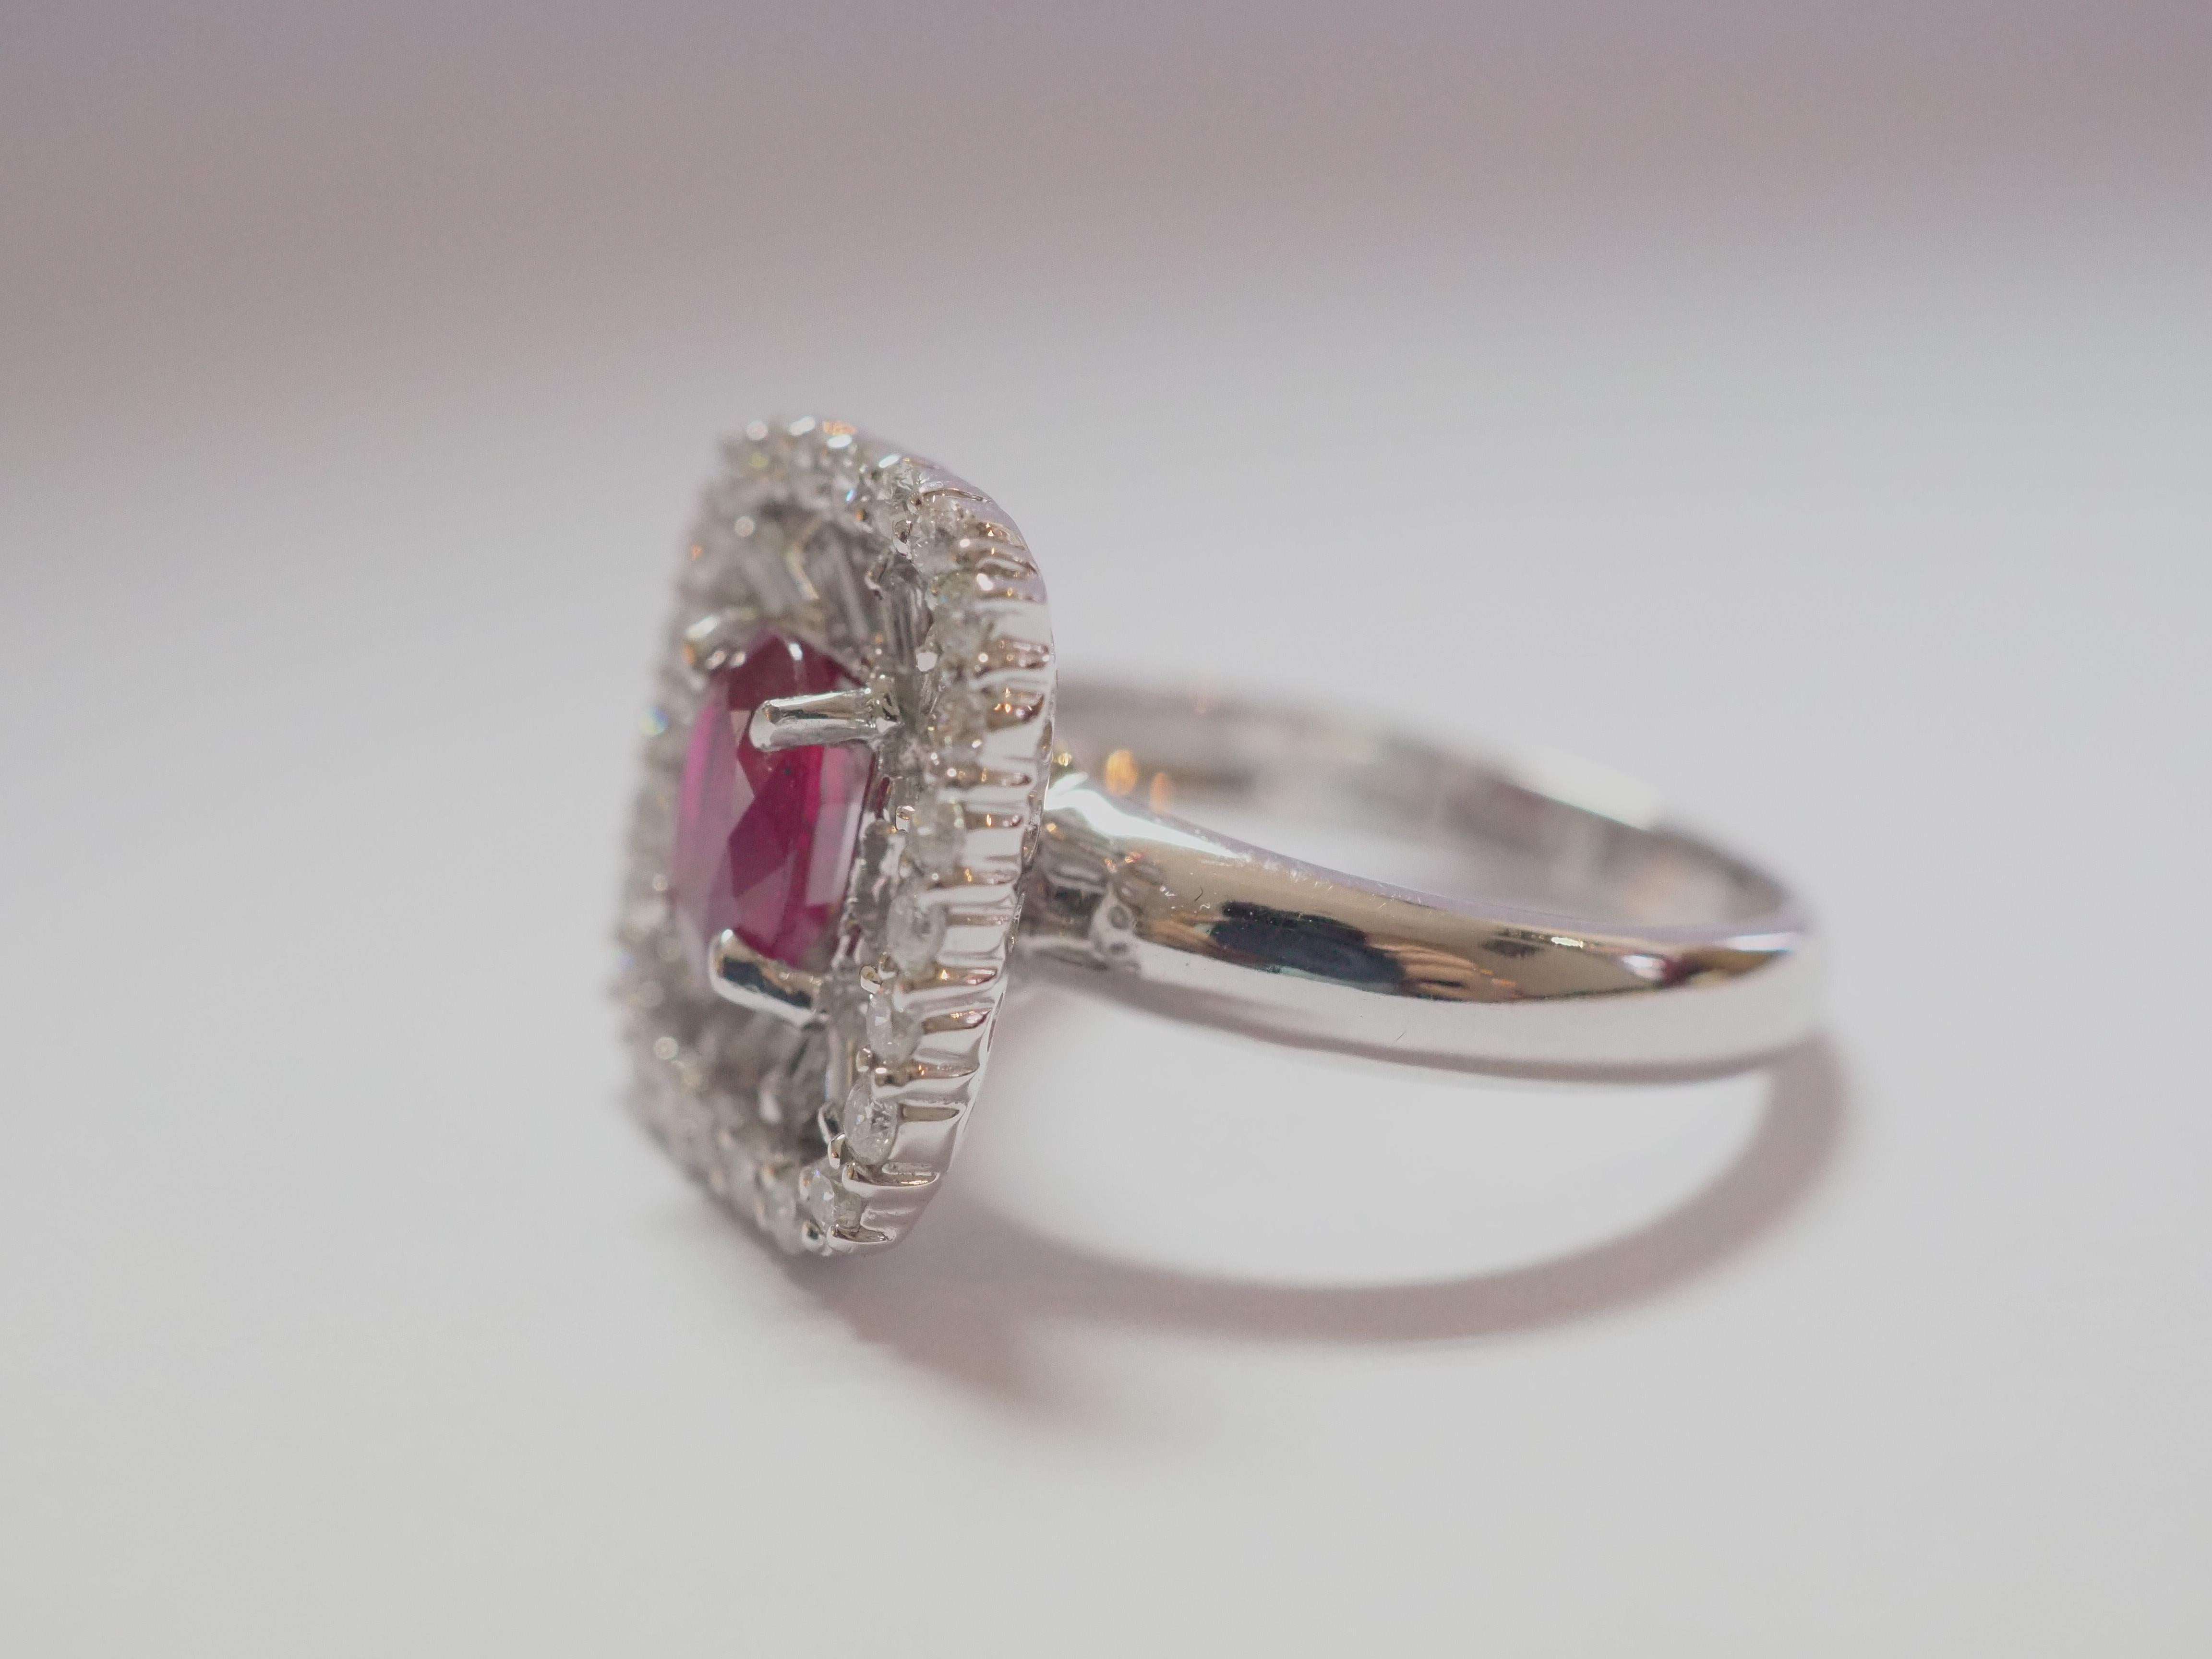 Oval Cut AIGS 18k White Gold 1.28ct Oval Thai Ruby & 0.7ct Diamond Cocktail Ring